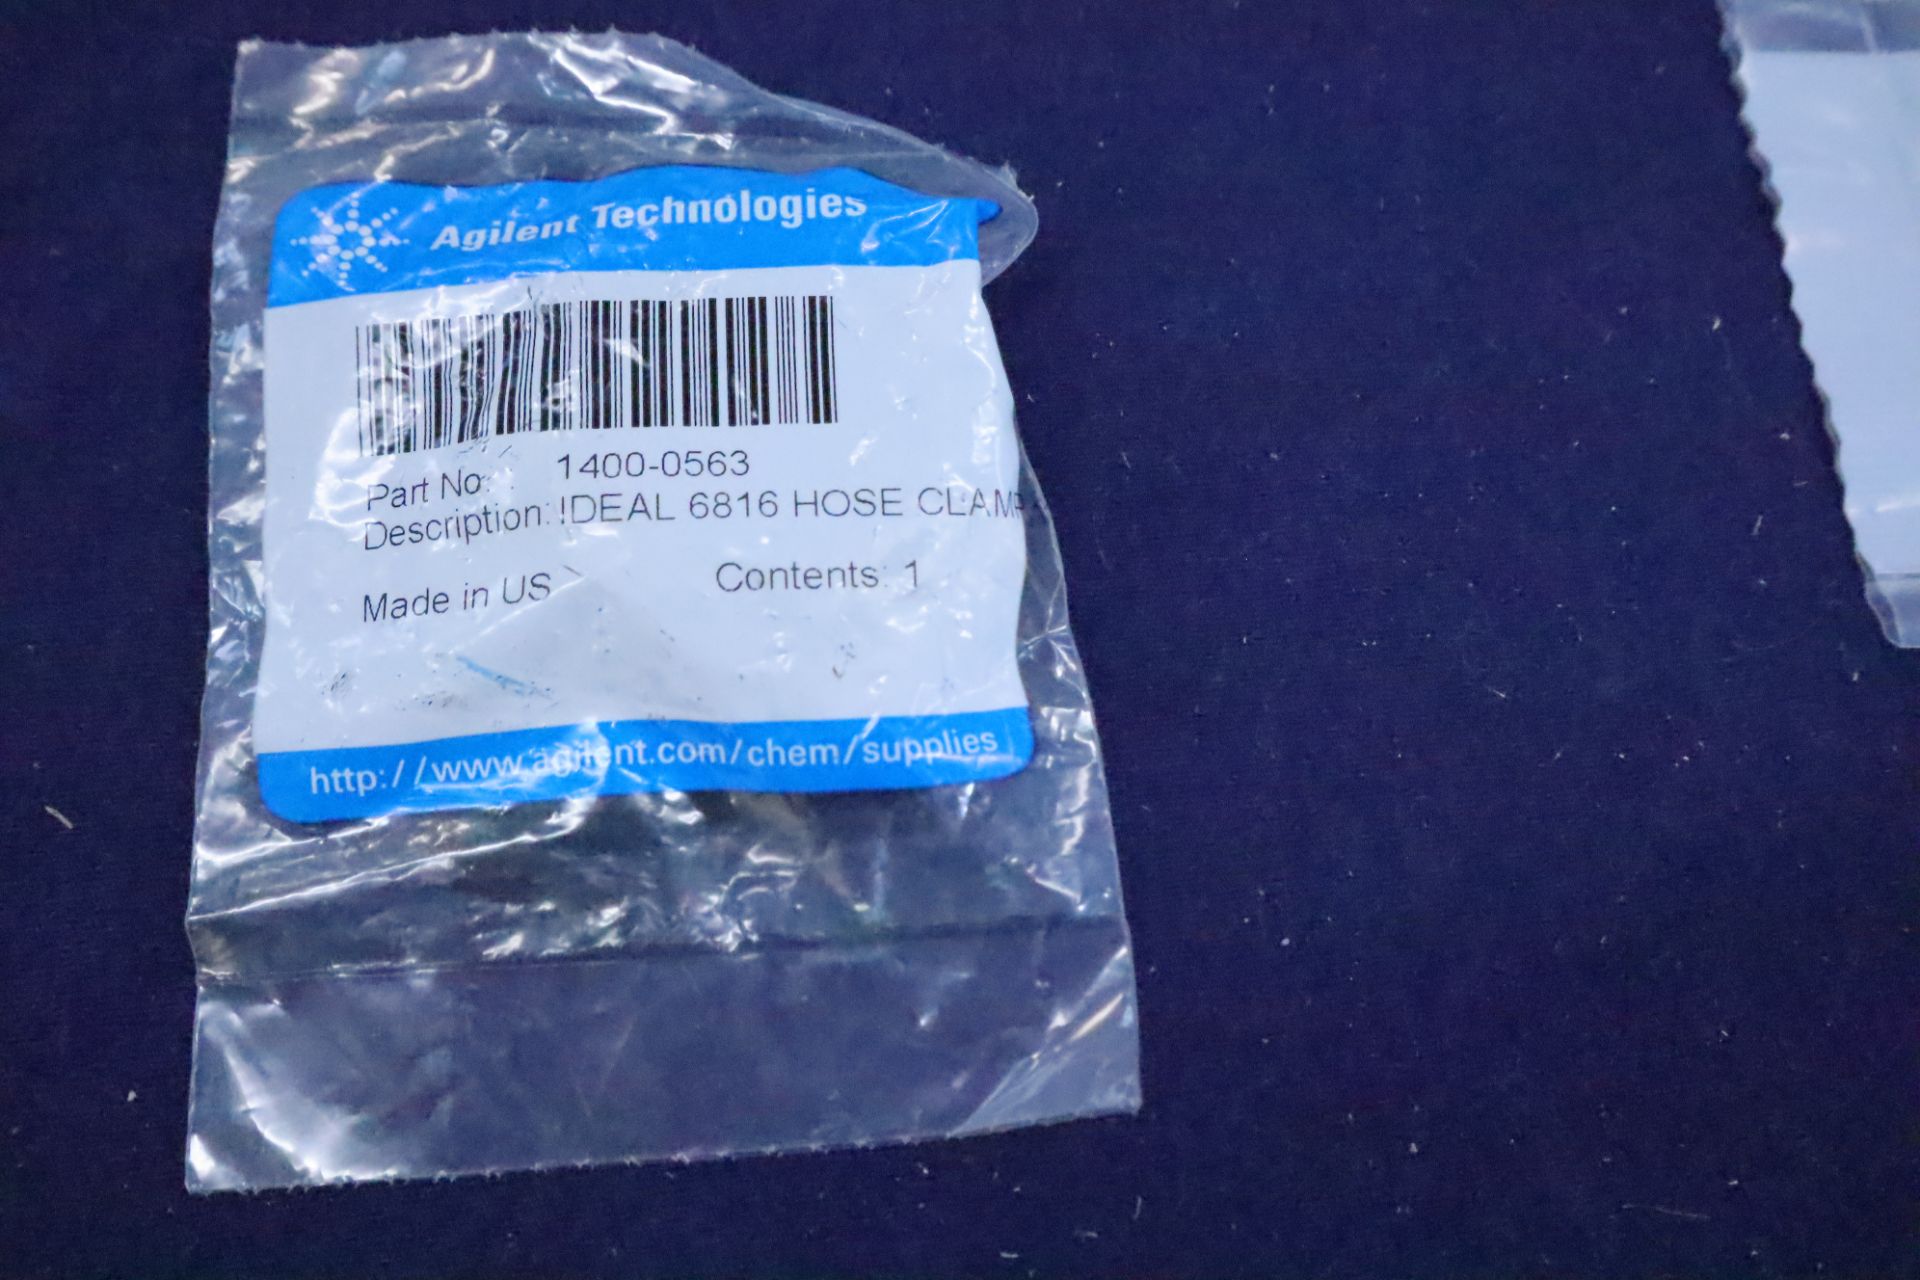 (NIB) Agilent Technologies OEM Replacement Parts for LC/MS Machines - Image 15 of 24